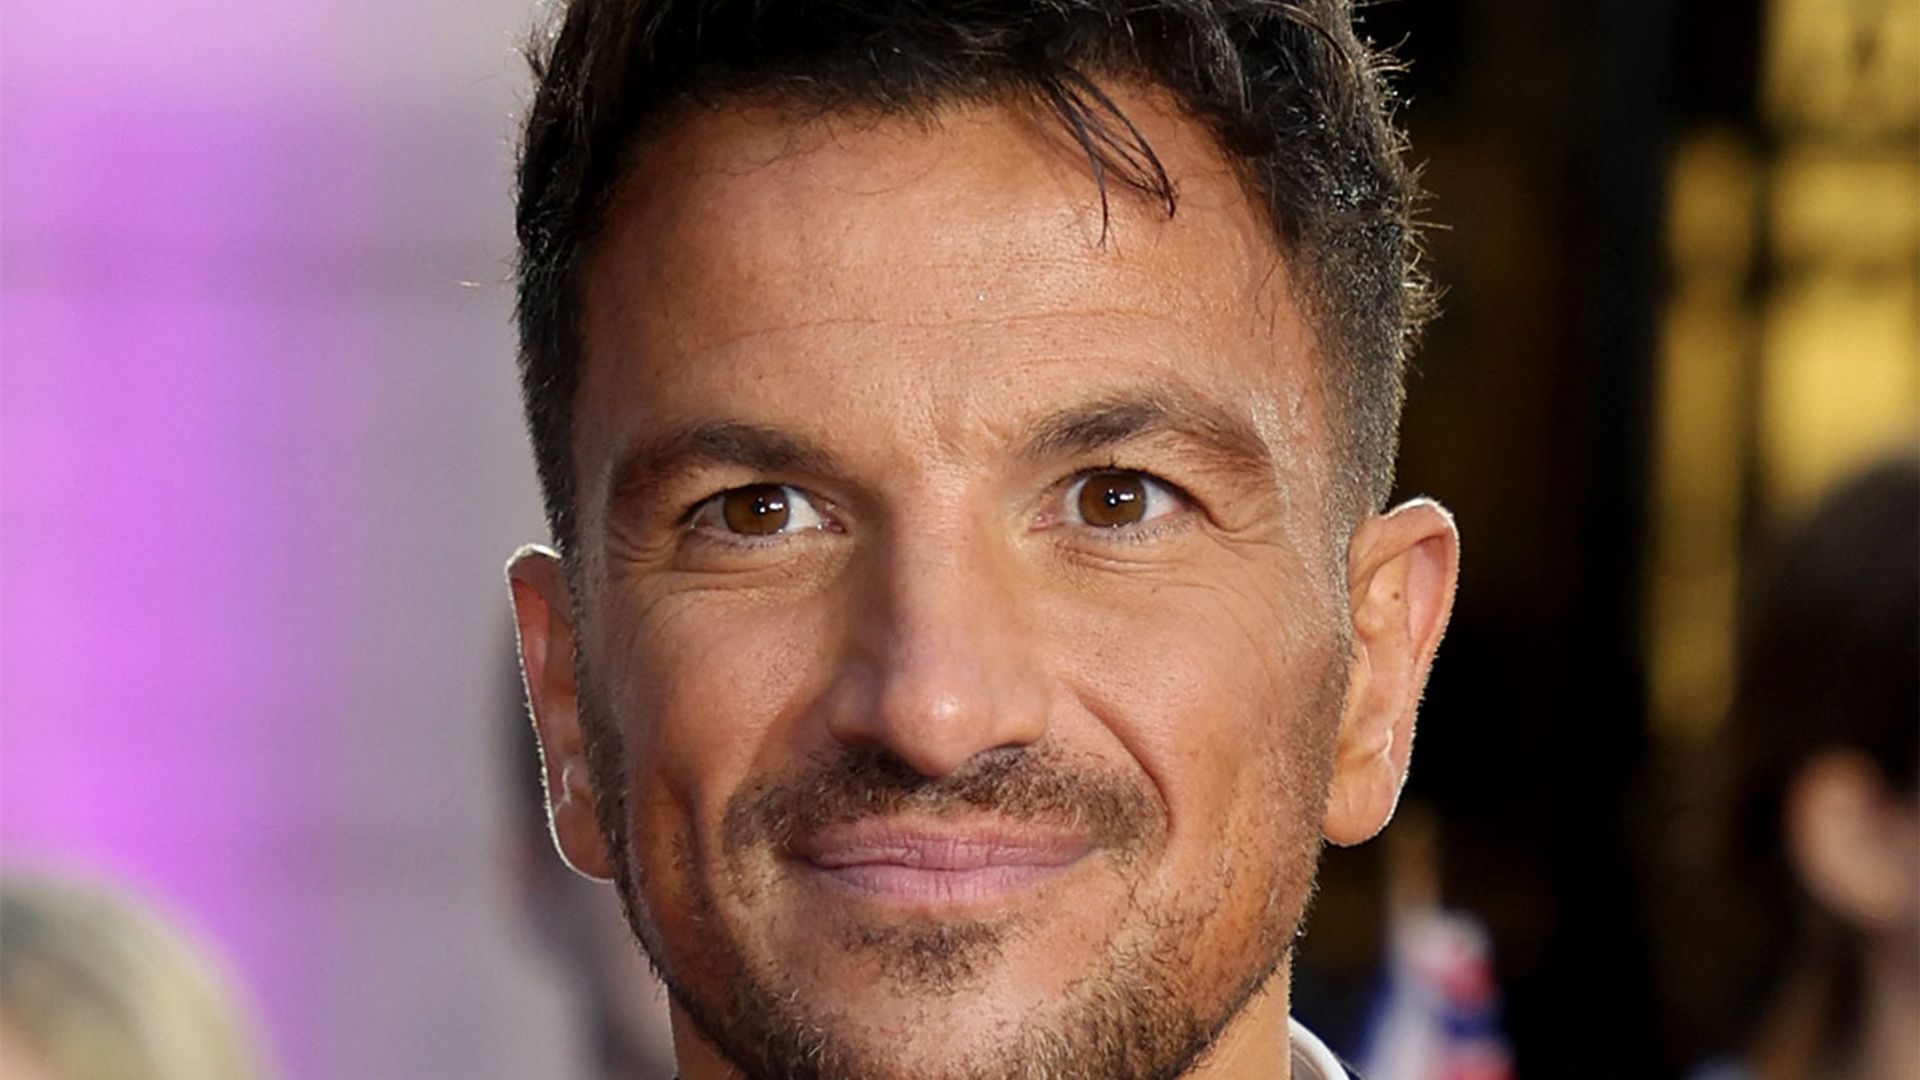 Peter Andre reveals touching message from rarely seen son Theo in heartfelt post